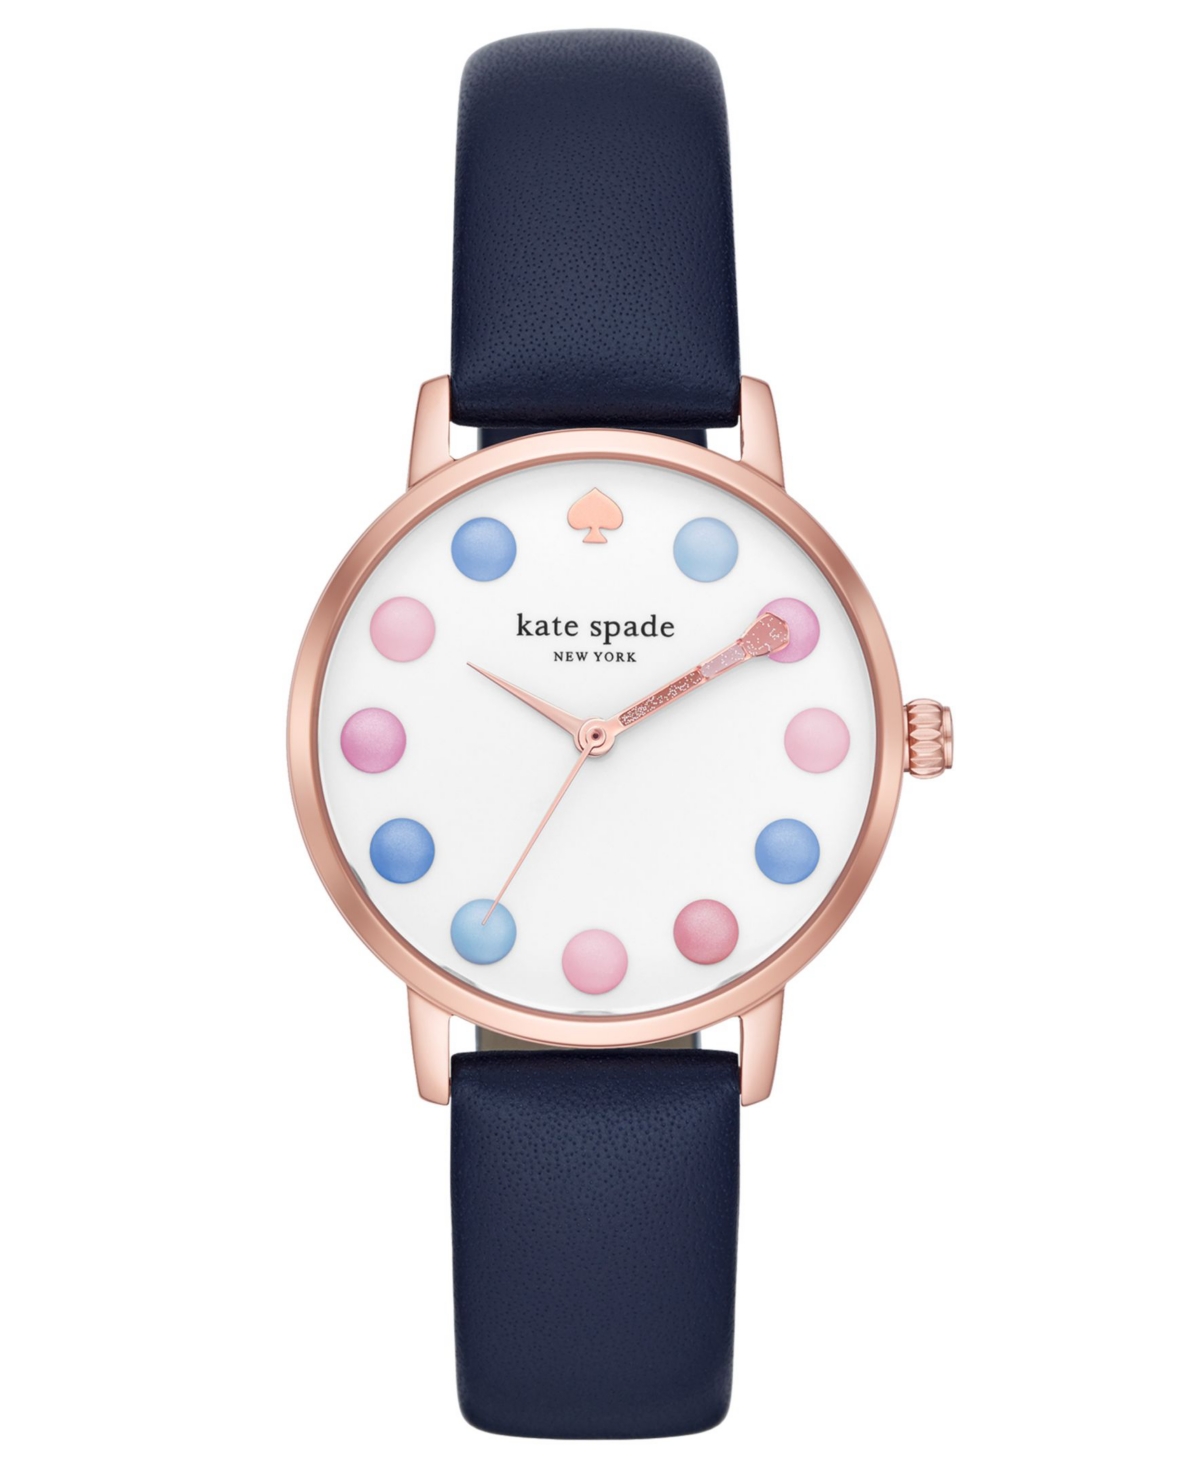 kate spade new york Women's Metro Three-Hand Make-Up Navy Leather Watch  34mm & Reviews - All Watches - Jewelry & Watches - Macy's